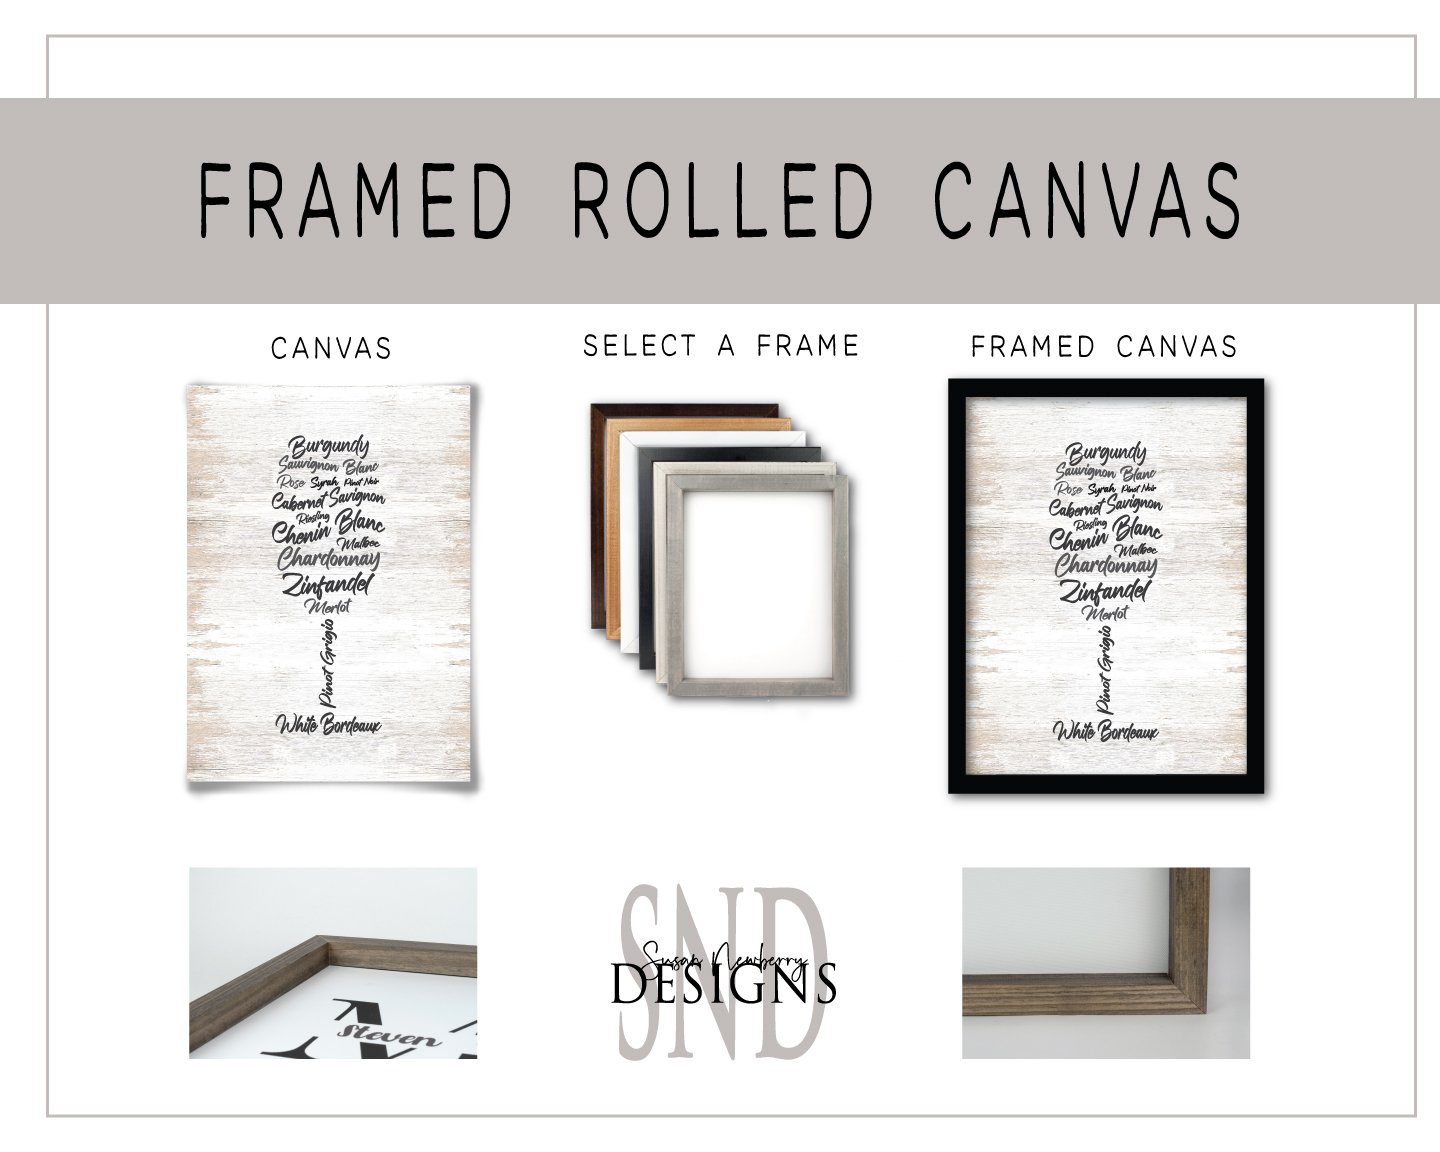 How to Frame a Rolled Canvas Print